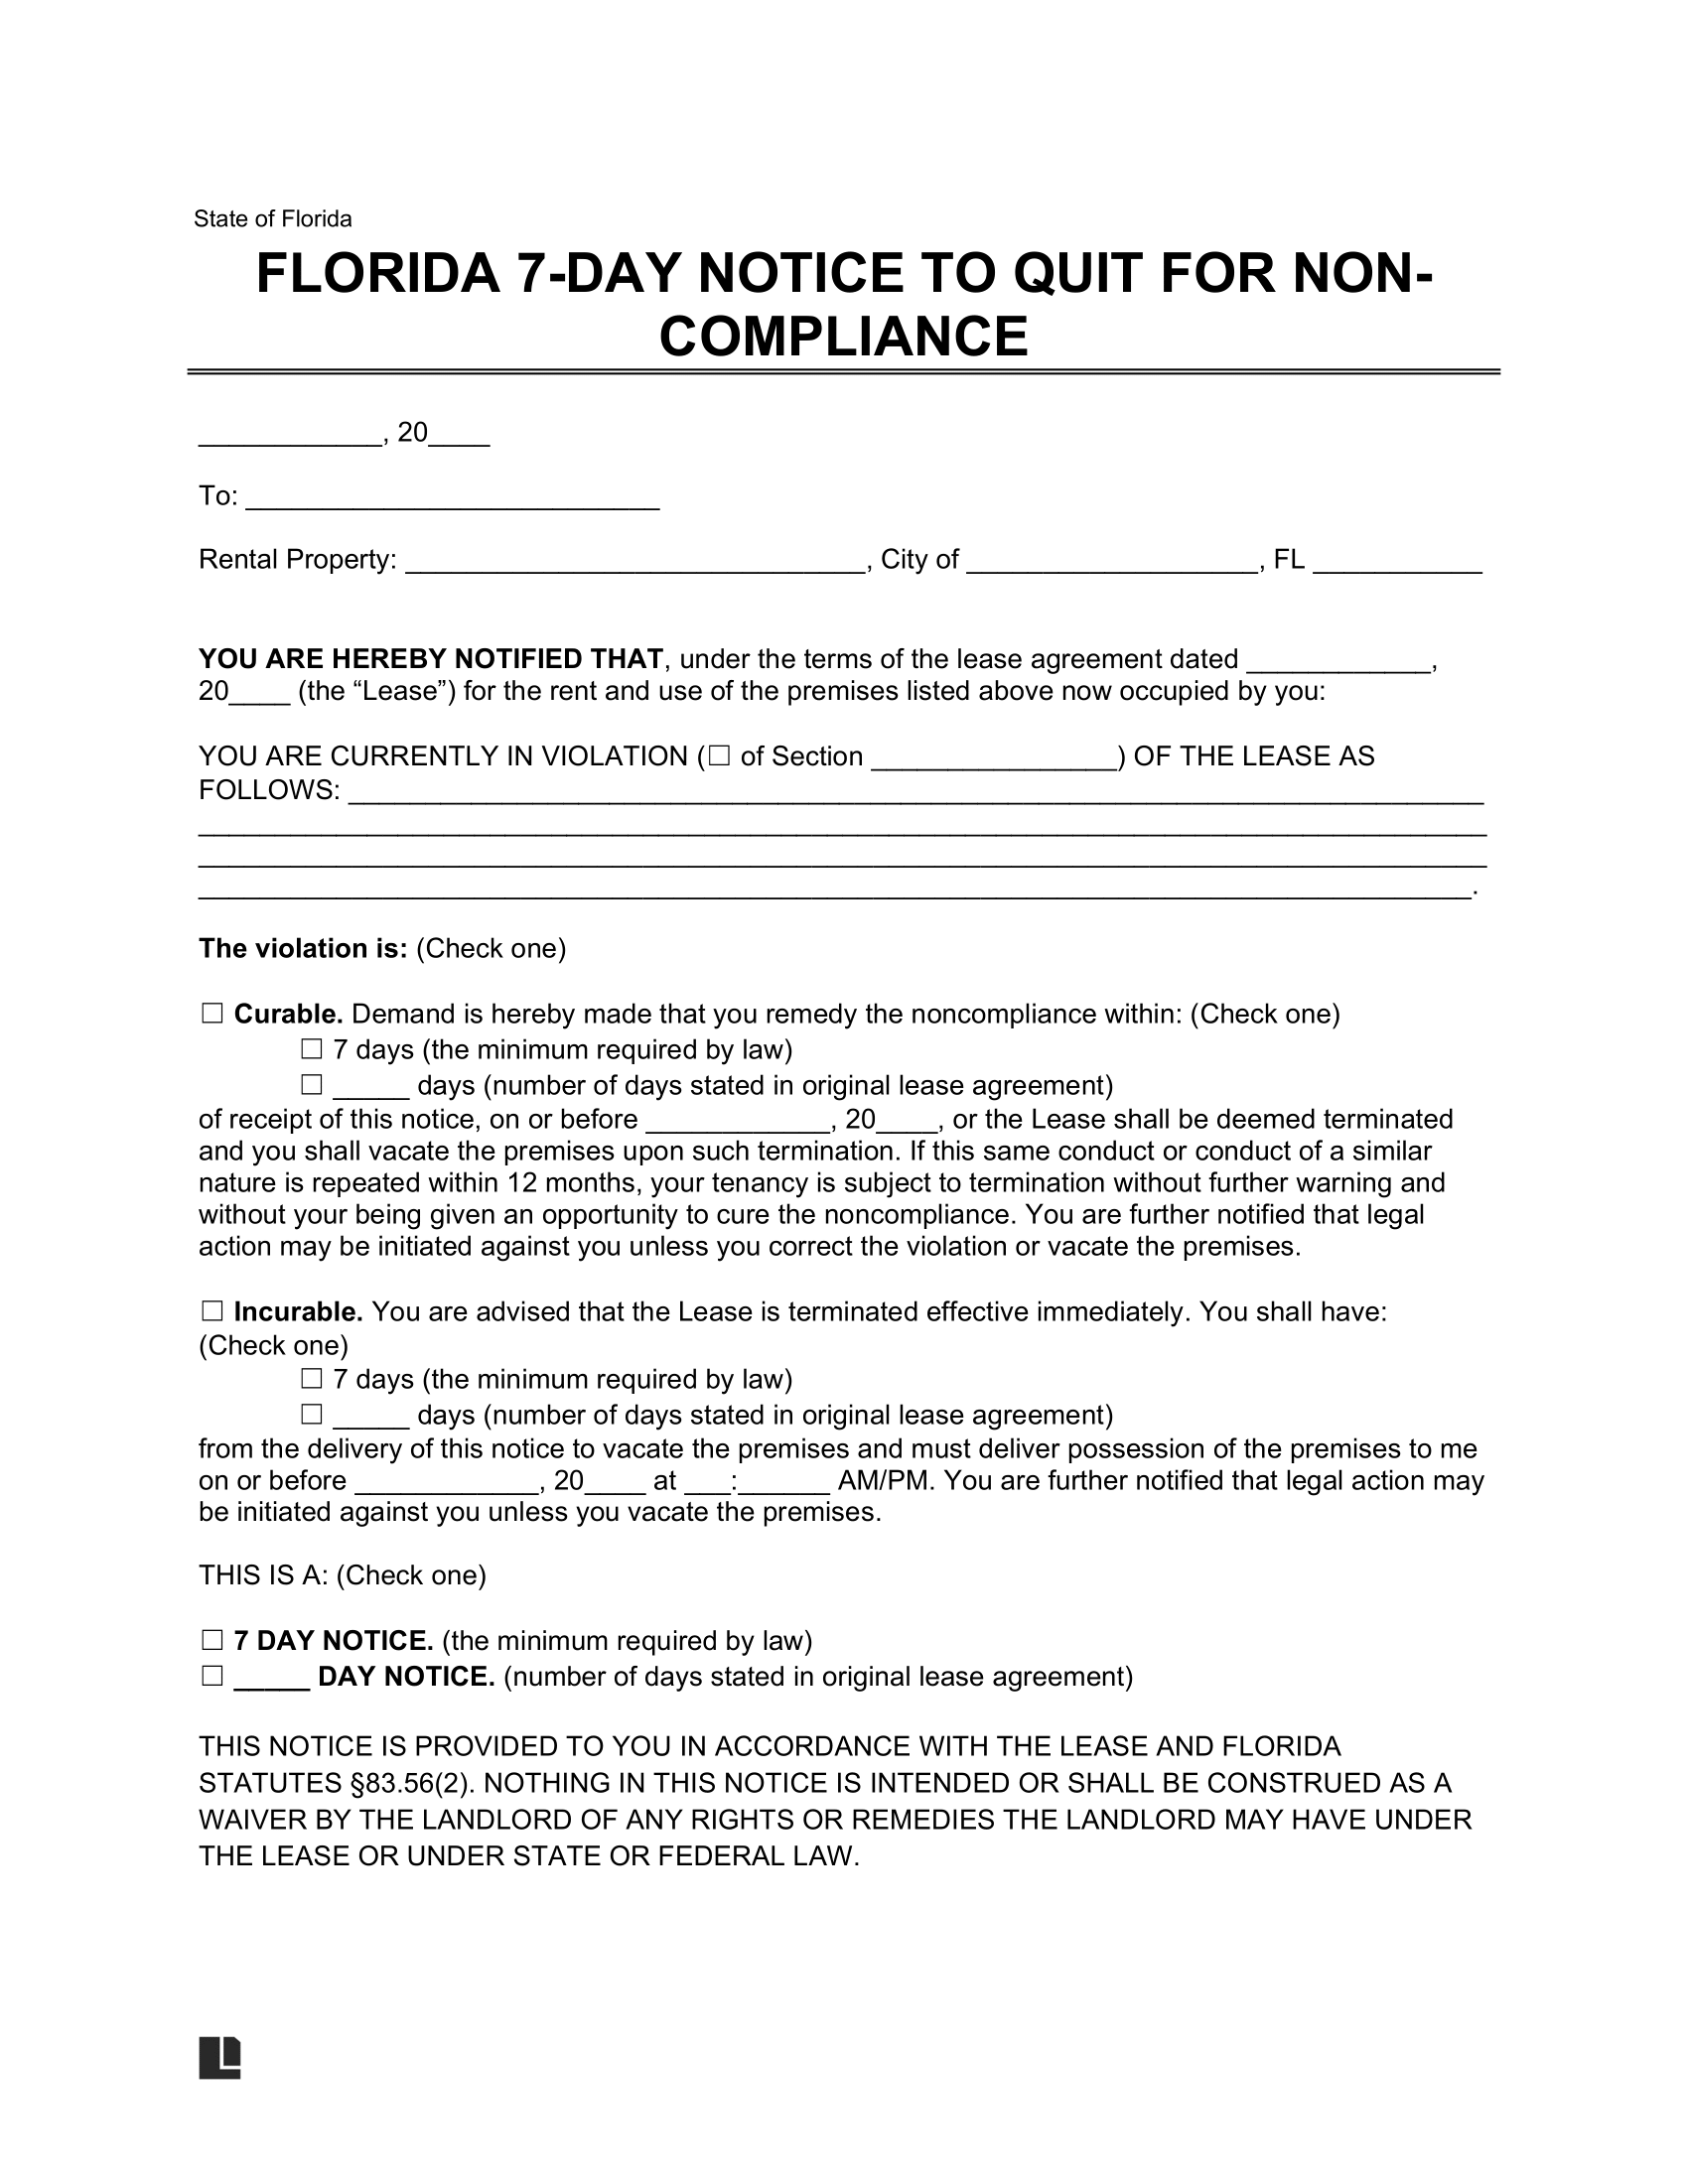 Florida 7-Day Eviction Notice to Quit for Non-Compliance